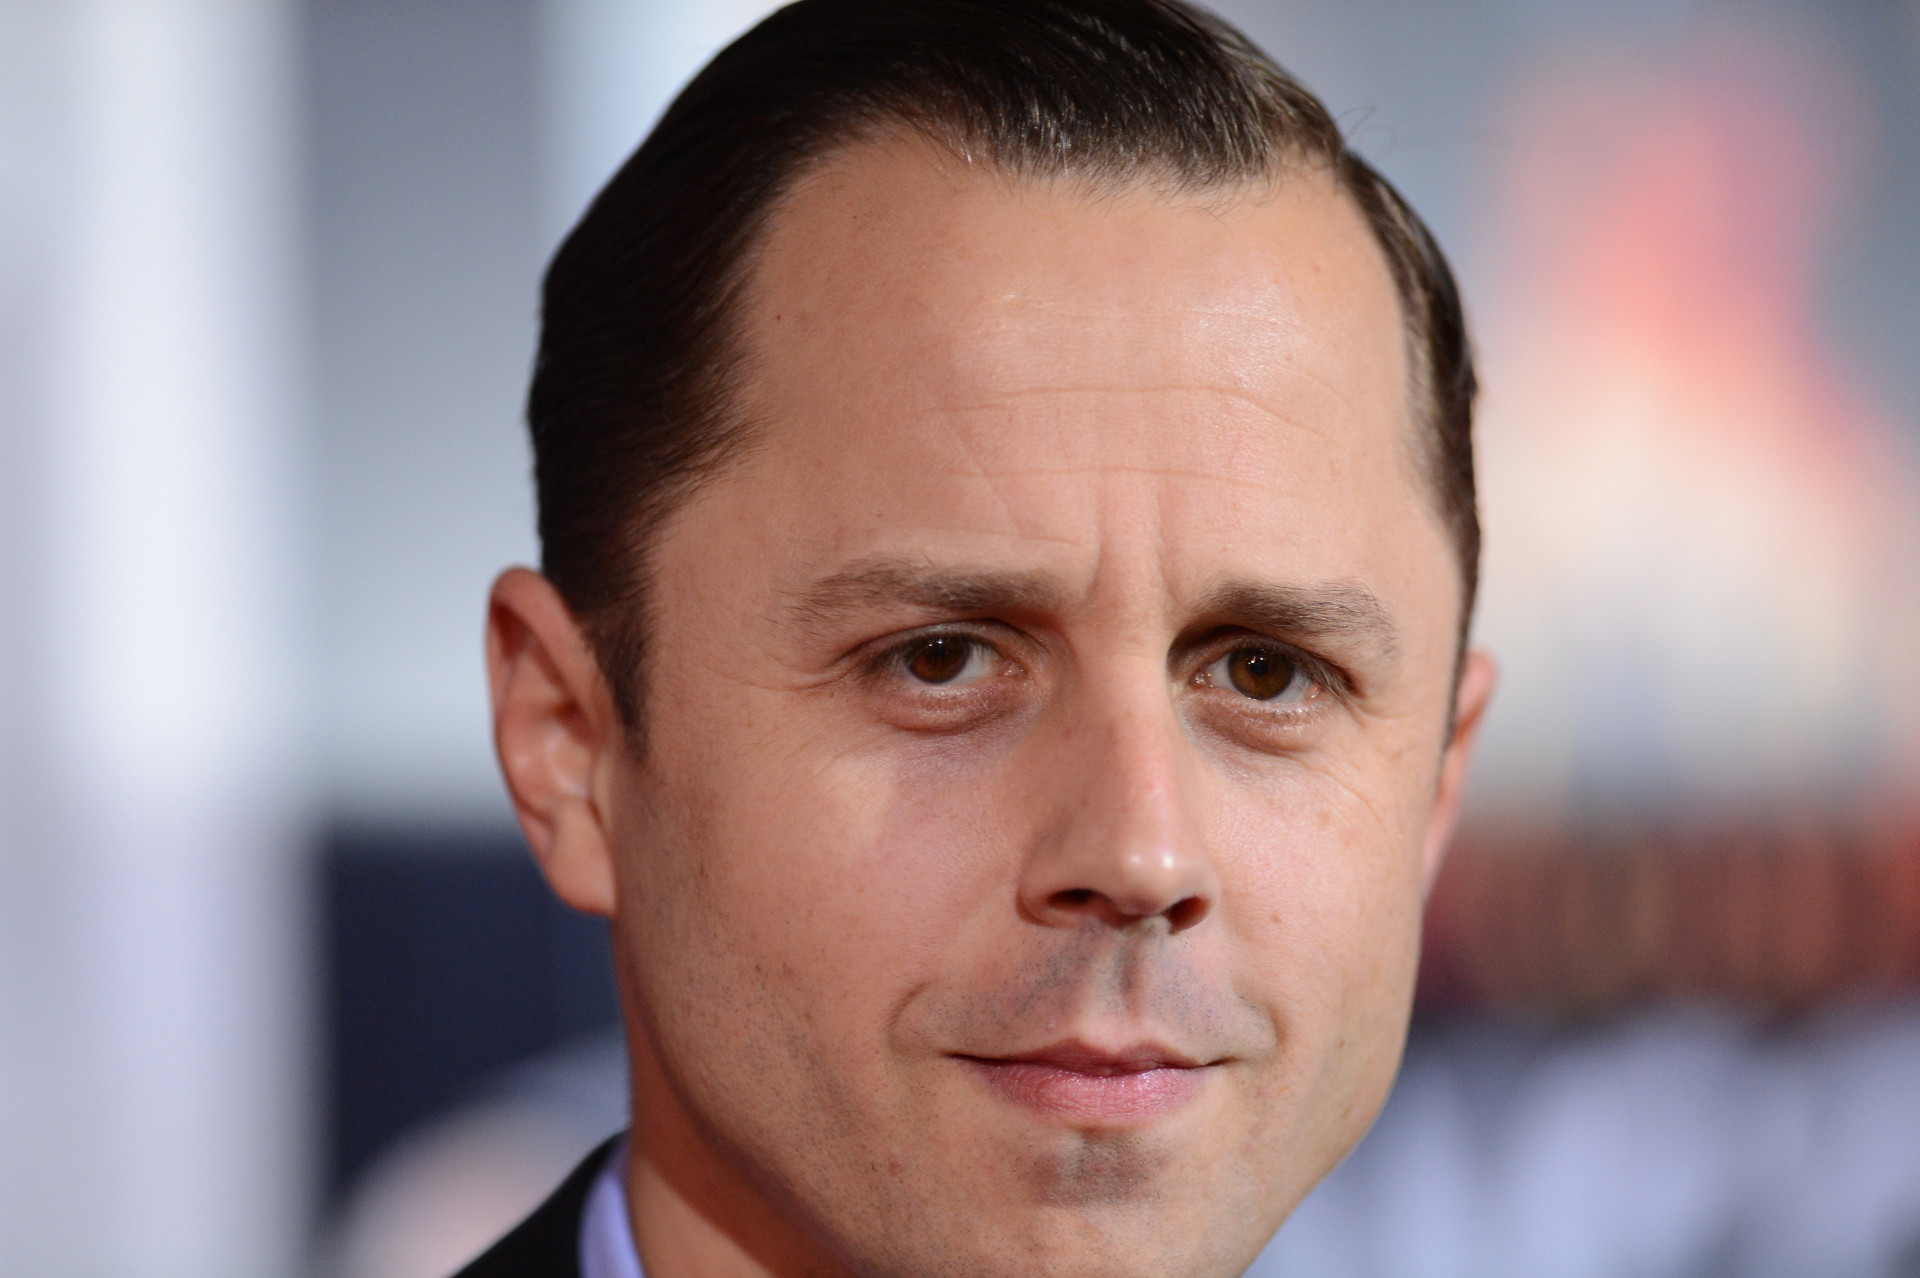 <p><span>The 'Sneaky Pete' who is also known for his recurring roles in 'My Name Is Earl' and 'Friends' is an active and longtime Scientologist. </span></p><p><a href="https://www.msn.com/en-us/community/channel/vid-7xx8mnucu55yw63we9va2gwr7uihbxwc68fxqp25x6tg4ftibpra?cvid=94631541bc0f4f89bfd59158d696ad7e">Follow us and access great exclusive content every day</a></p>